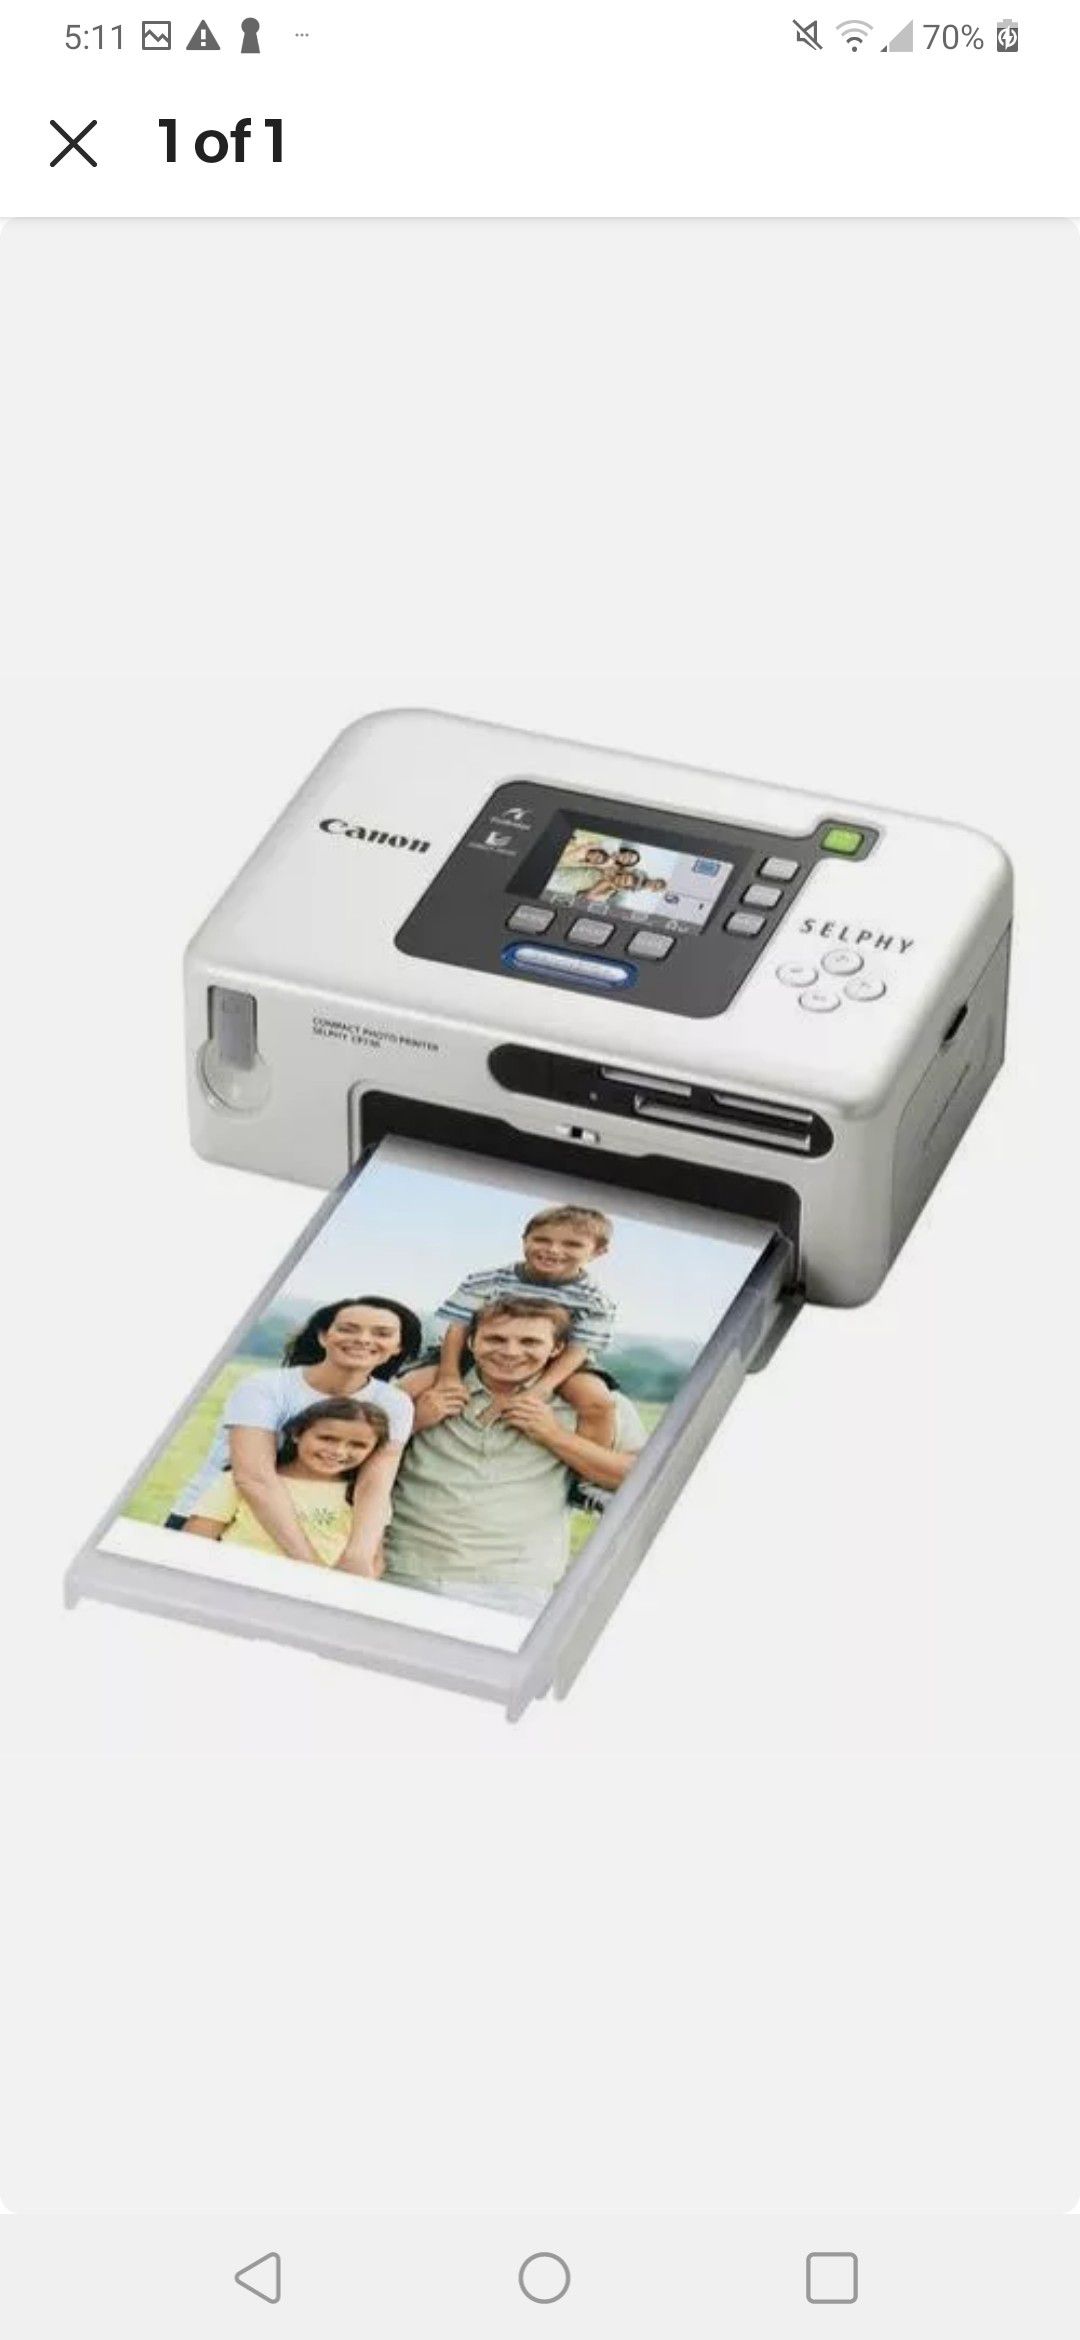 Canon SELPHY. - (New) CP730 - Digital Photo Thermal Printer